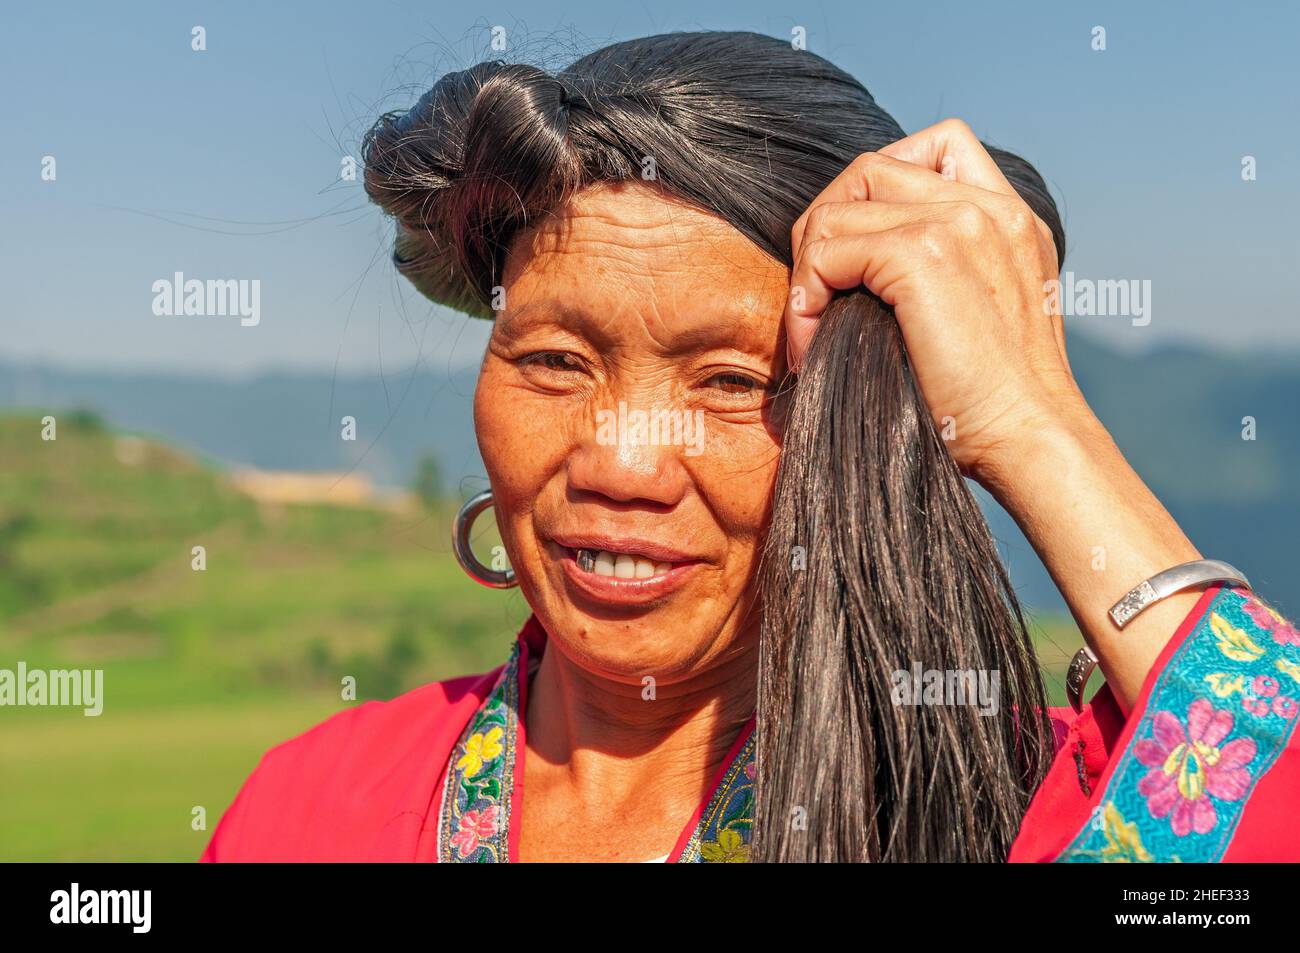 Smiling long haired woman portrait of Yao ethnic group by the Longsheng Ping An rice terraces, Guangxi province, China. Stock Photo